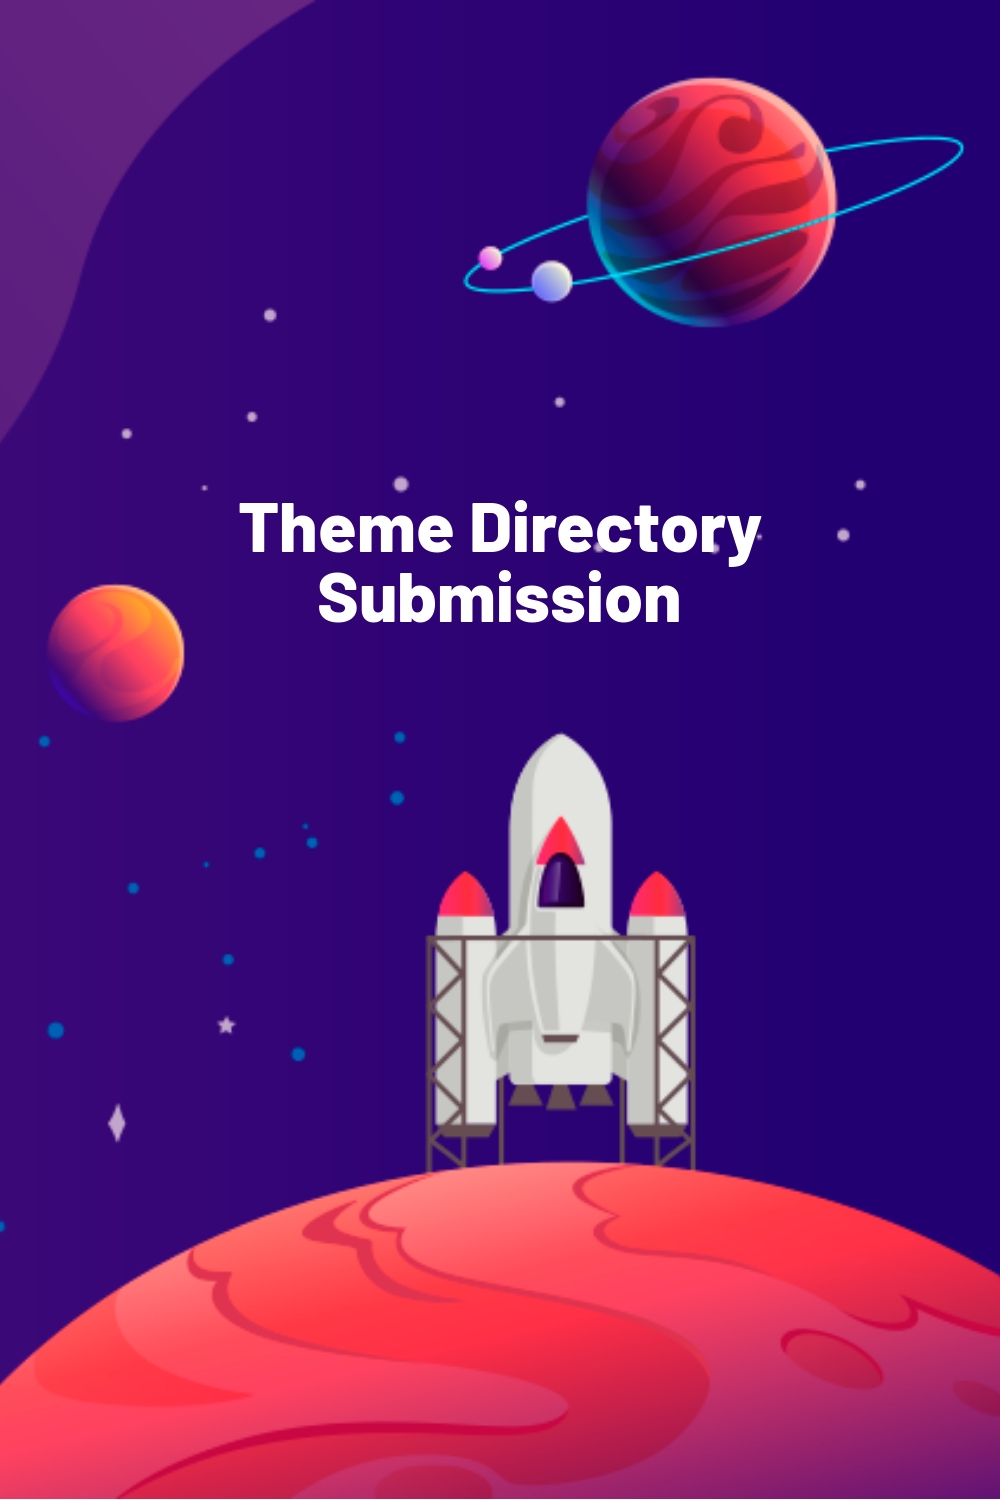 Theme Directory Submission